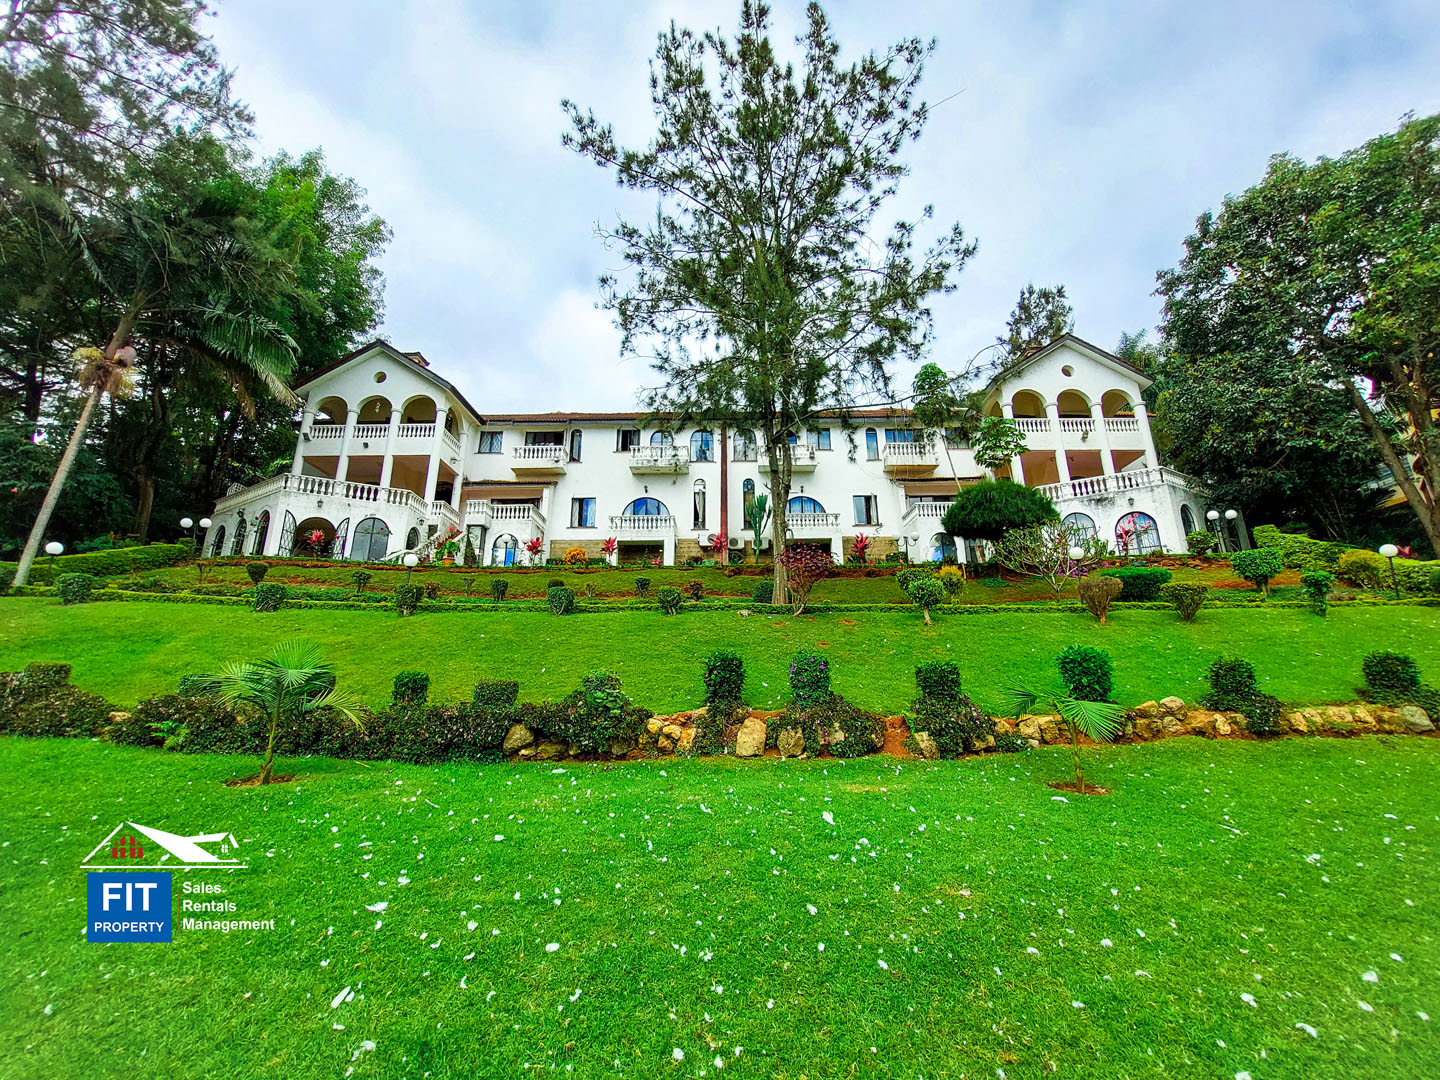 5 Bedroom Home on Nyari Dam, Ibis Drive, Nyari Estate, Nairobi for sale. Sits on a total acreage of 0.7 acres of lush landscaped lawns. 135M.